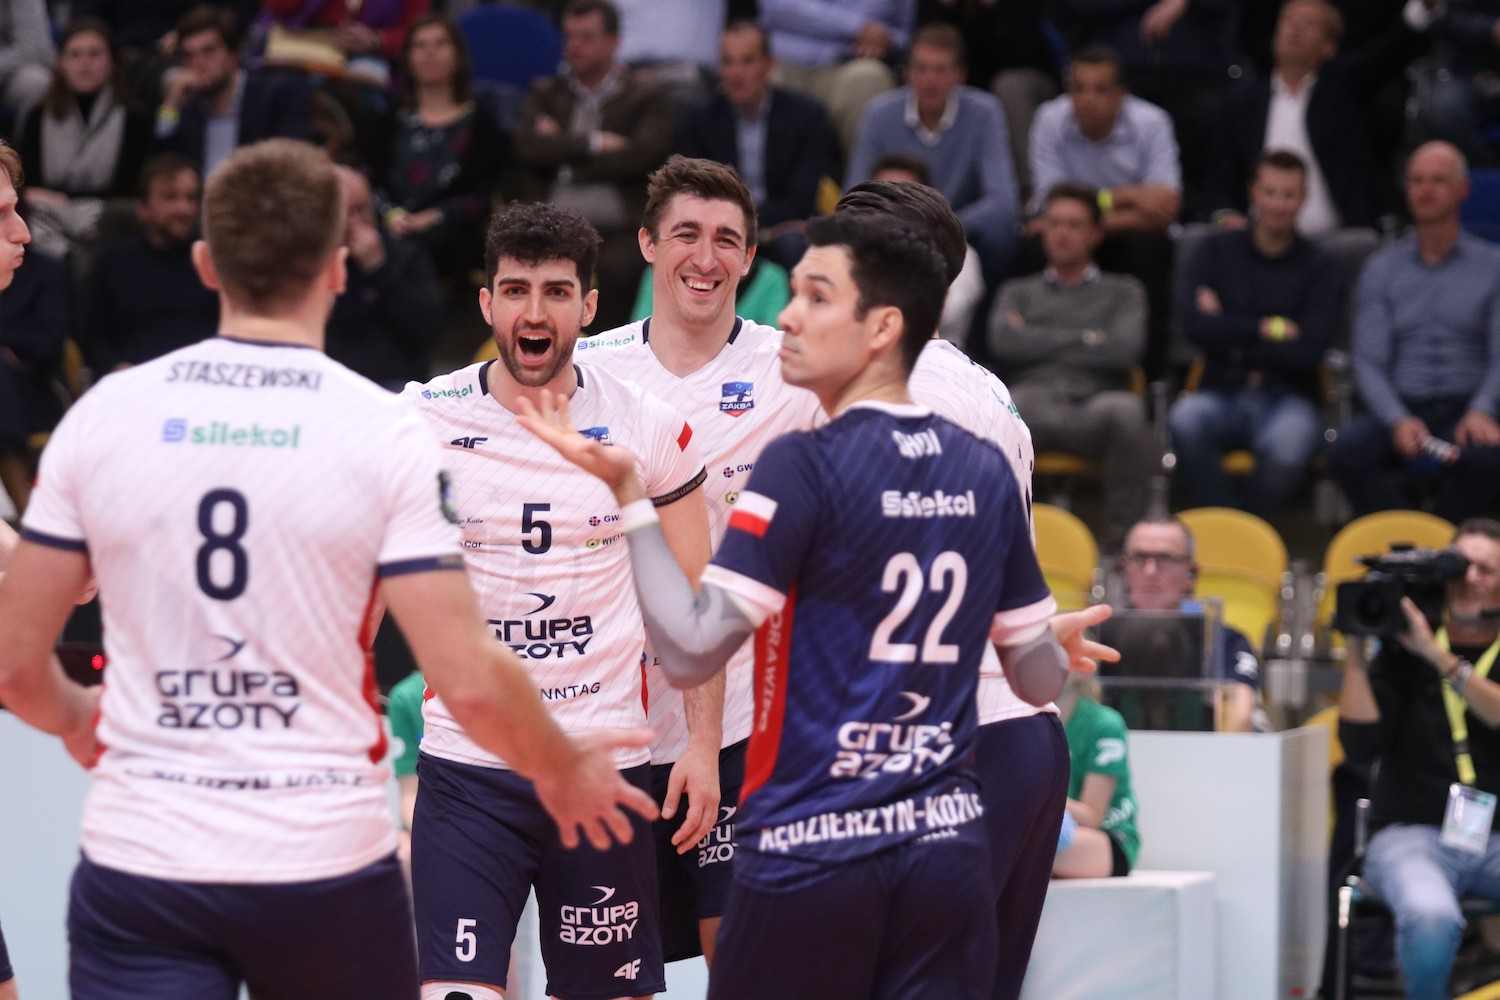 WorldofVolley CL M ZAKSA defeated Trentino in 1st Leg of Champions League quarterfinals